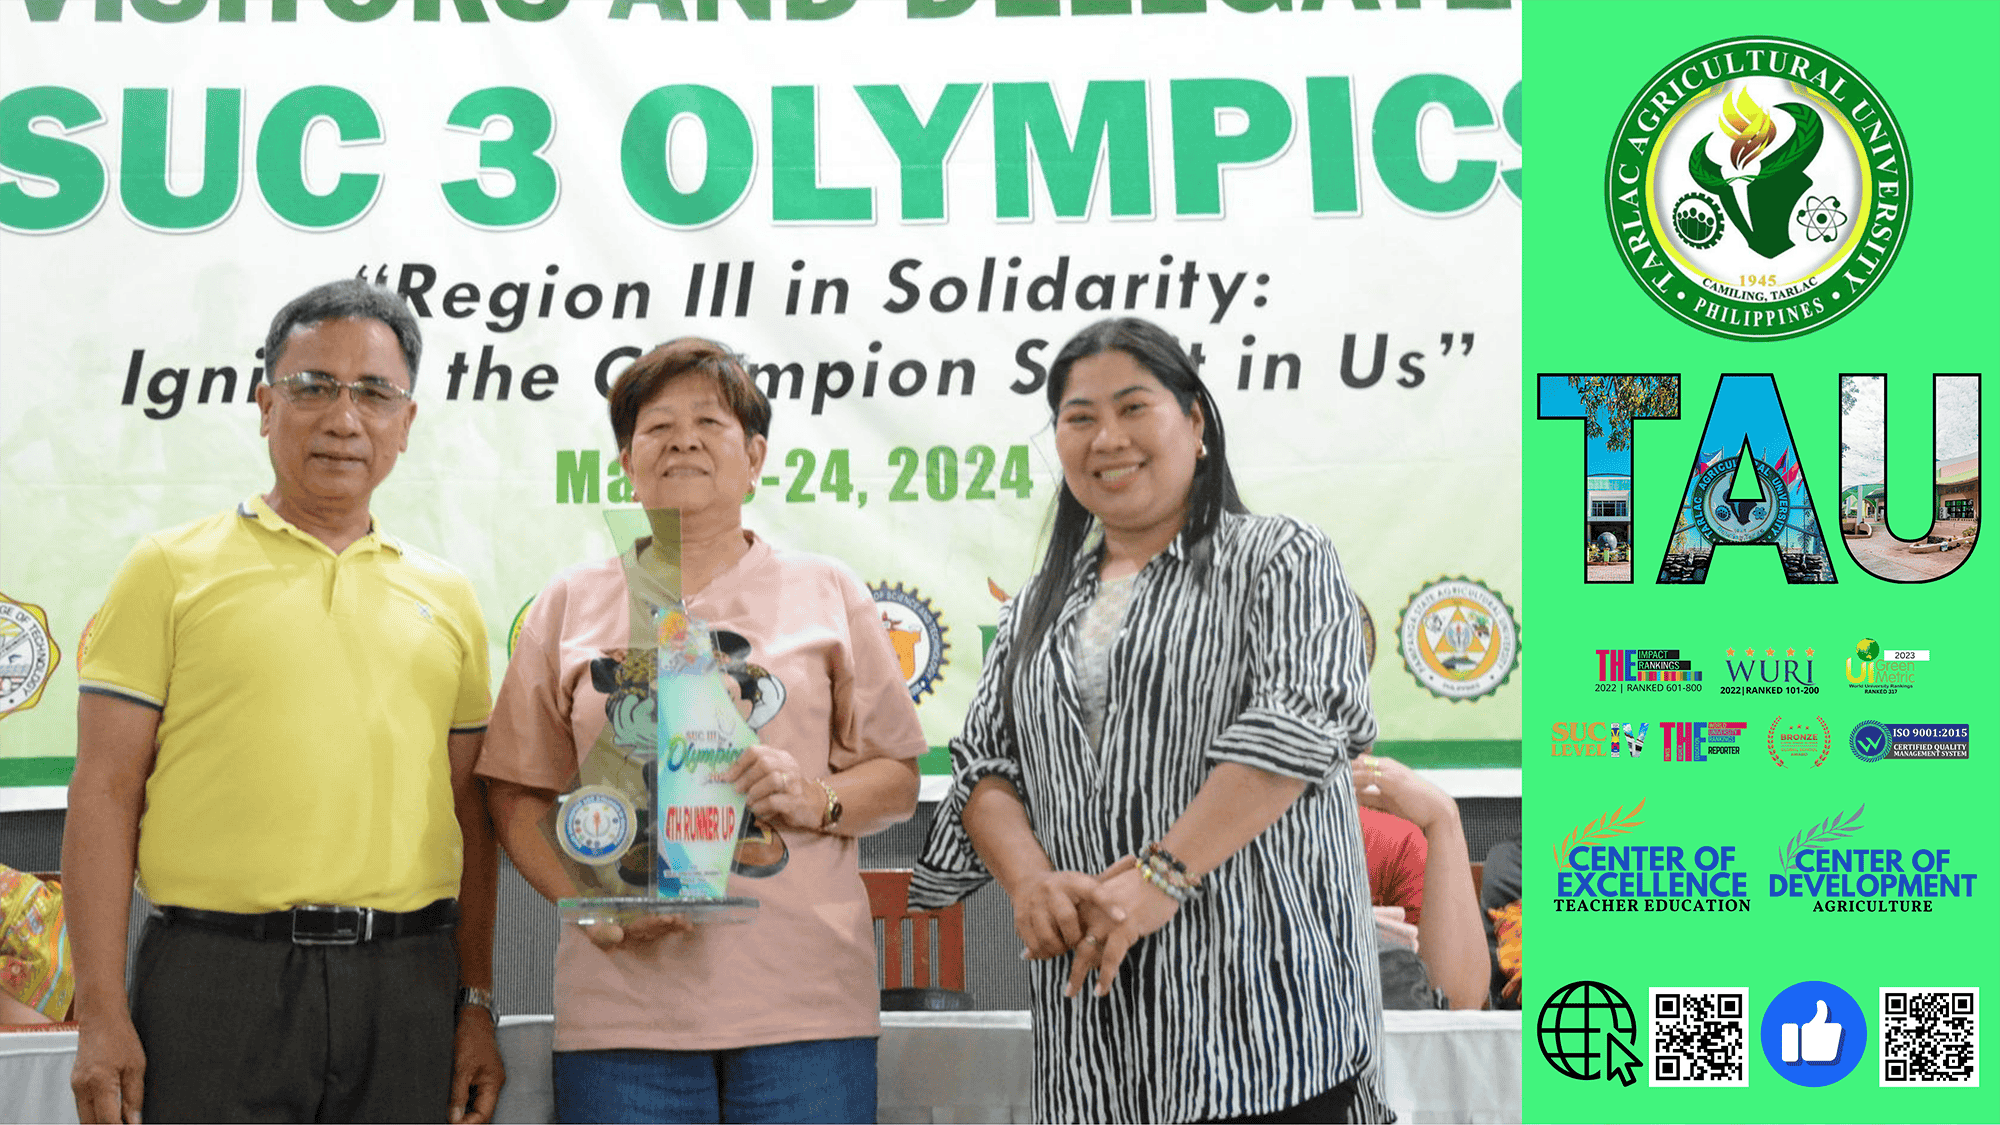 𝐌𝐈𝐋𝐄𝐒𝐓𝐎𝐍𝐄𝐒 | After hauling historic 98 medals, TAU ranks 6th in SUC III Olympics